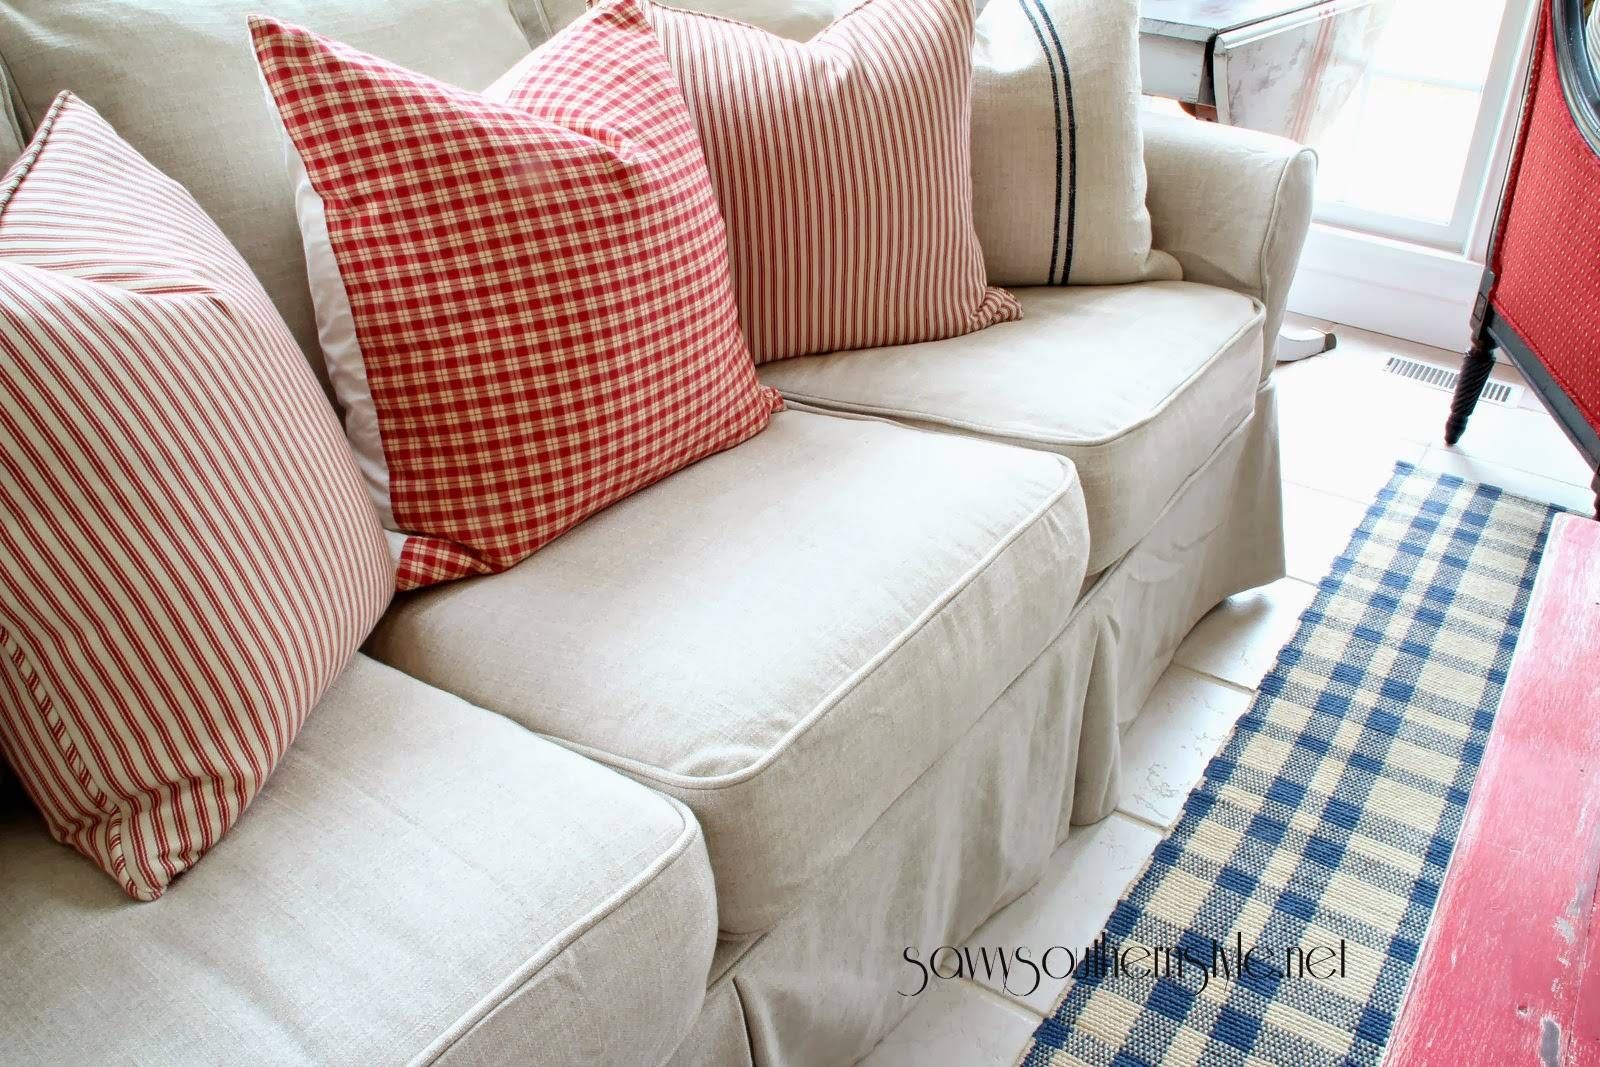 Custom Slipcovers And Couch Cover For Any Sofa Online Regarding Contemporary Sofa Slipcovers (View 26 of 30)